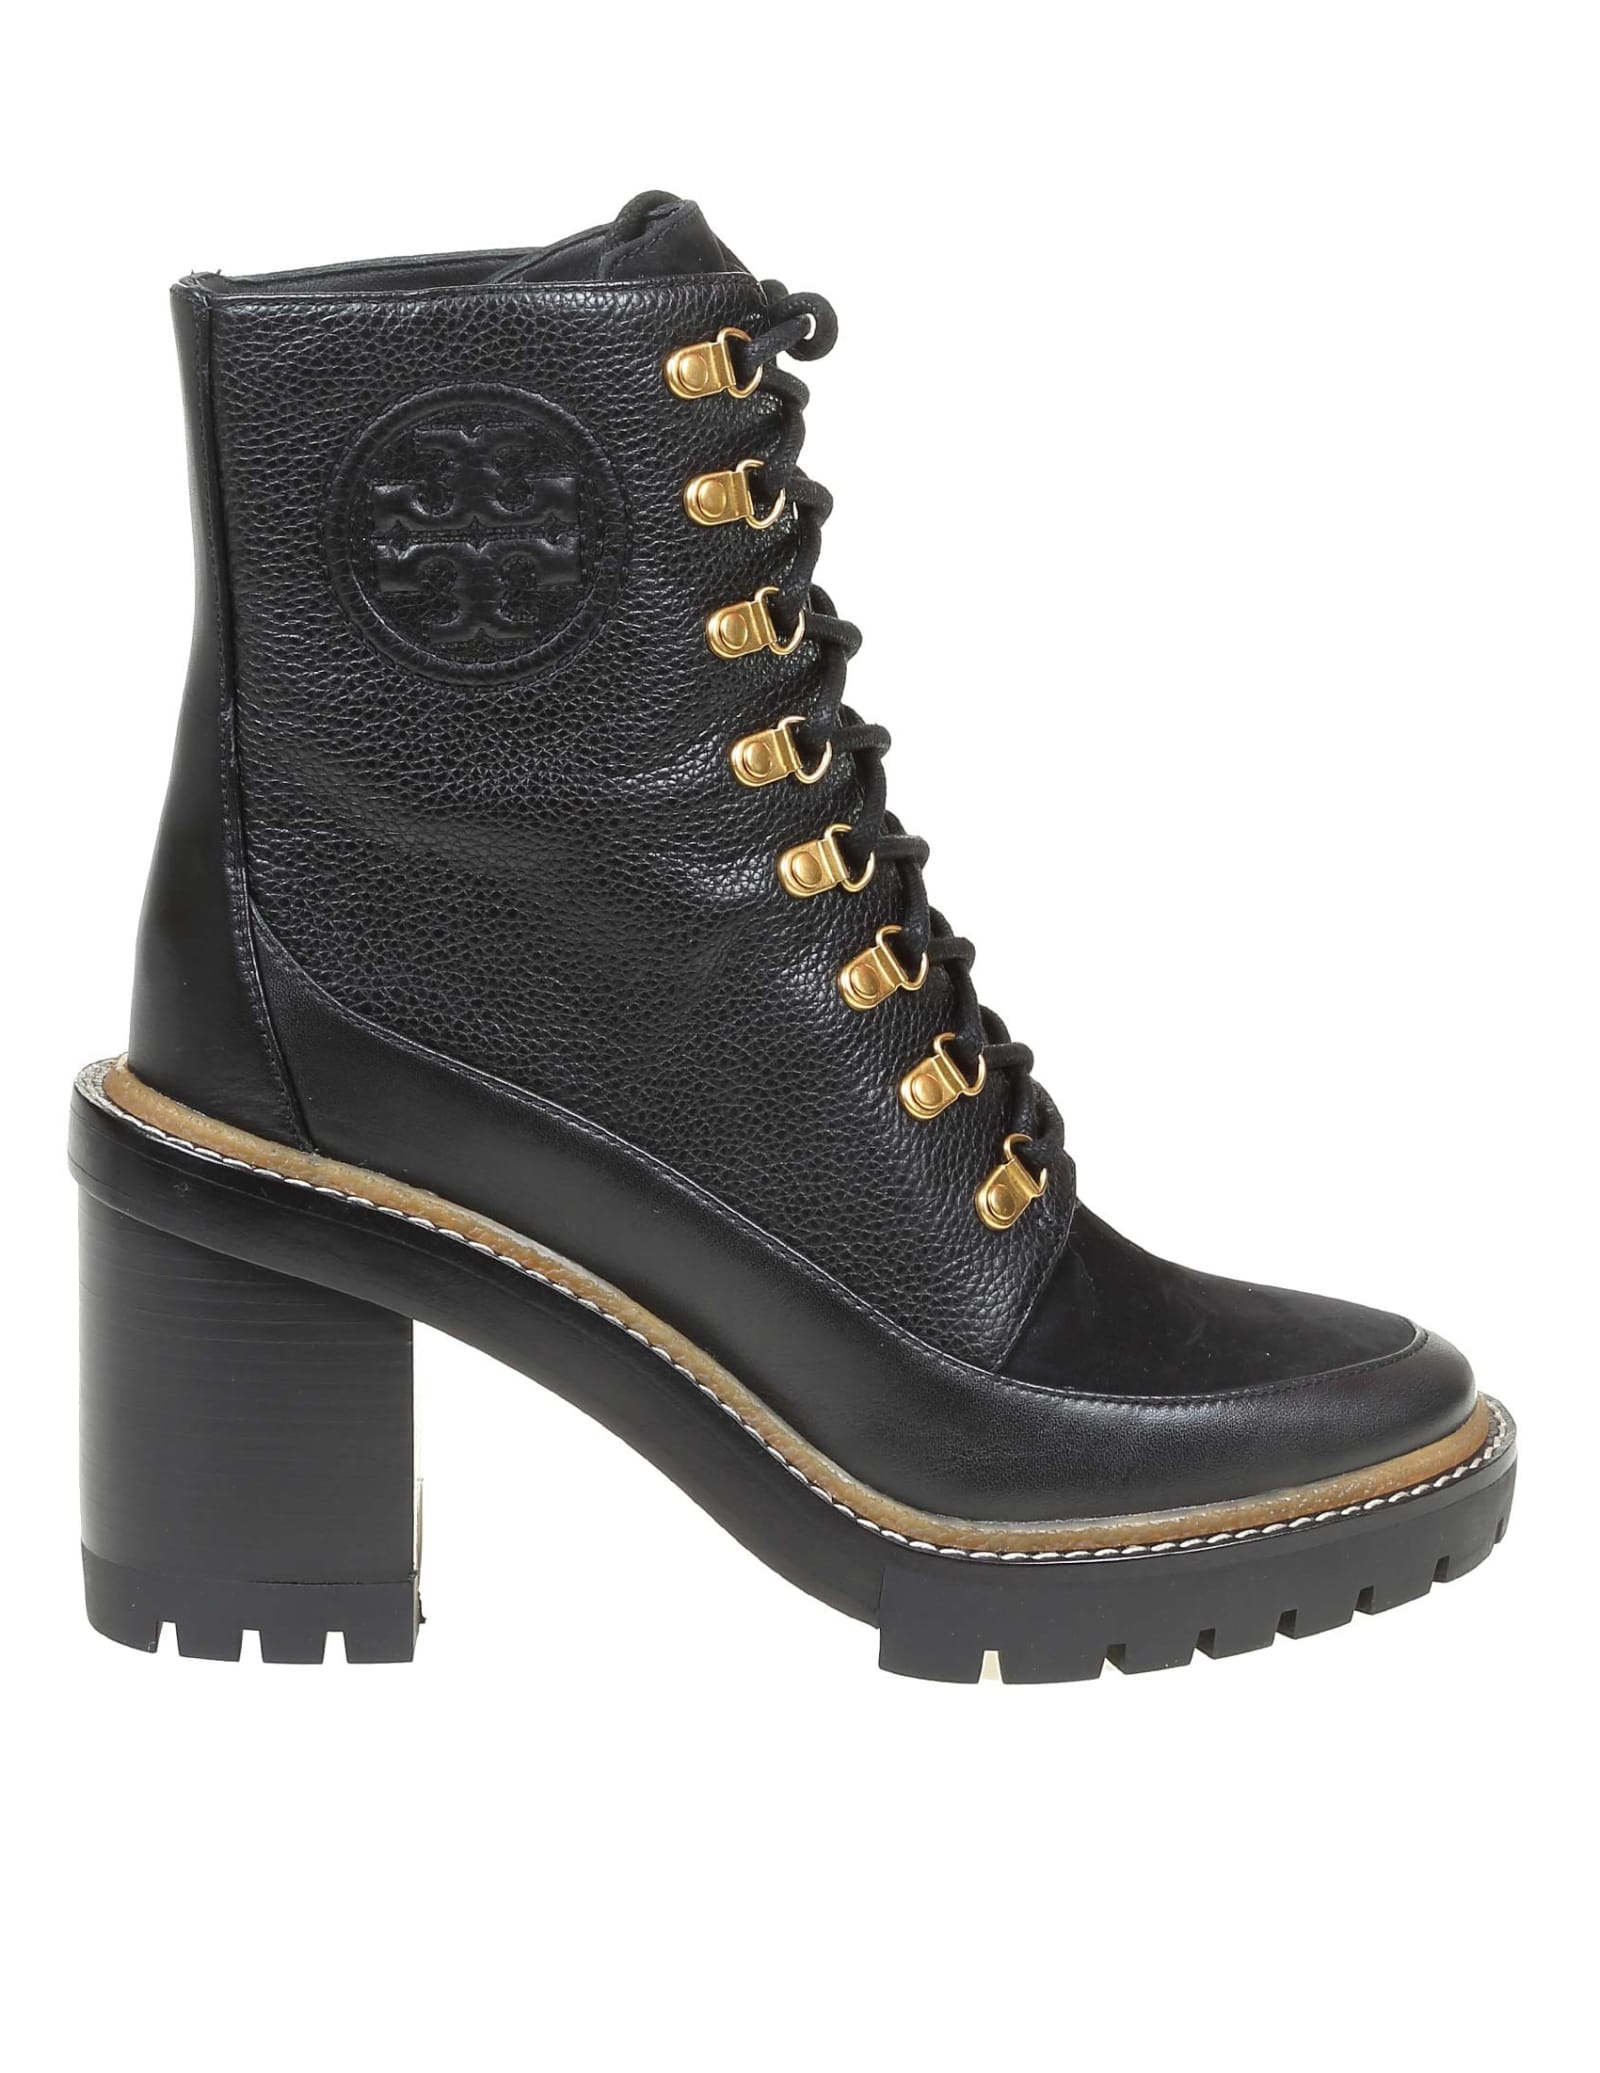 Tory Burch Miller Boots In Black Leather